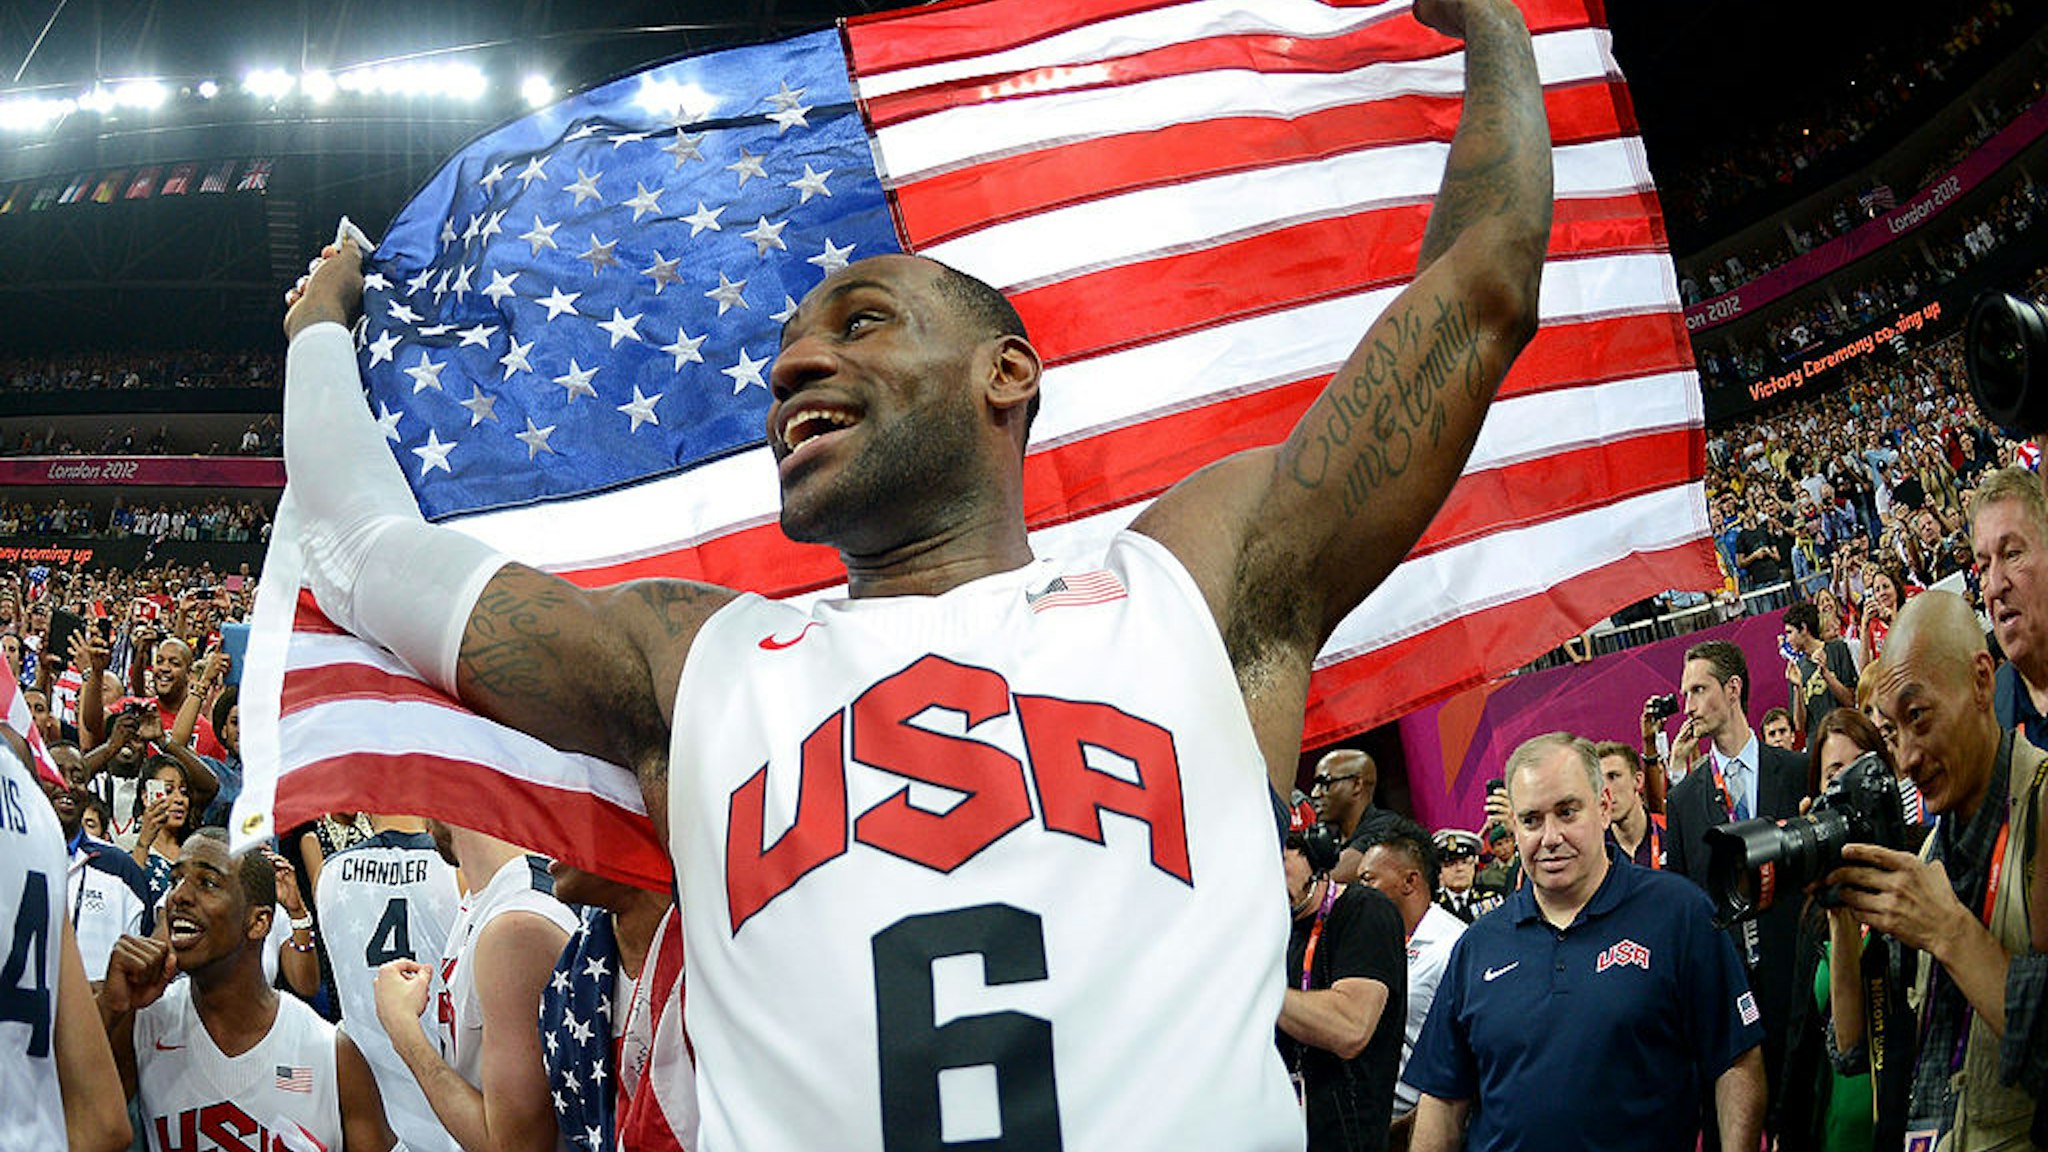 LONDON, ENGLAND - AUGUST 12: LeBron James #6 of the United States celebrates winning the Men's Basketball gold medal game between the United States and Spain on Day 16 of the London 2012 Olympics Games at North Greenwich Arena on August 12, 2012 in London, England. (Photo by Harry How/Getty Images)